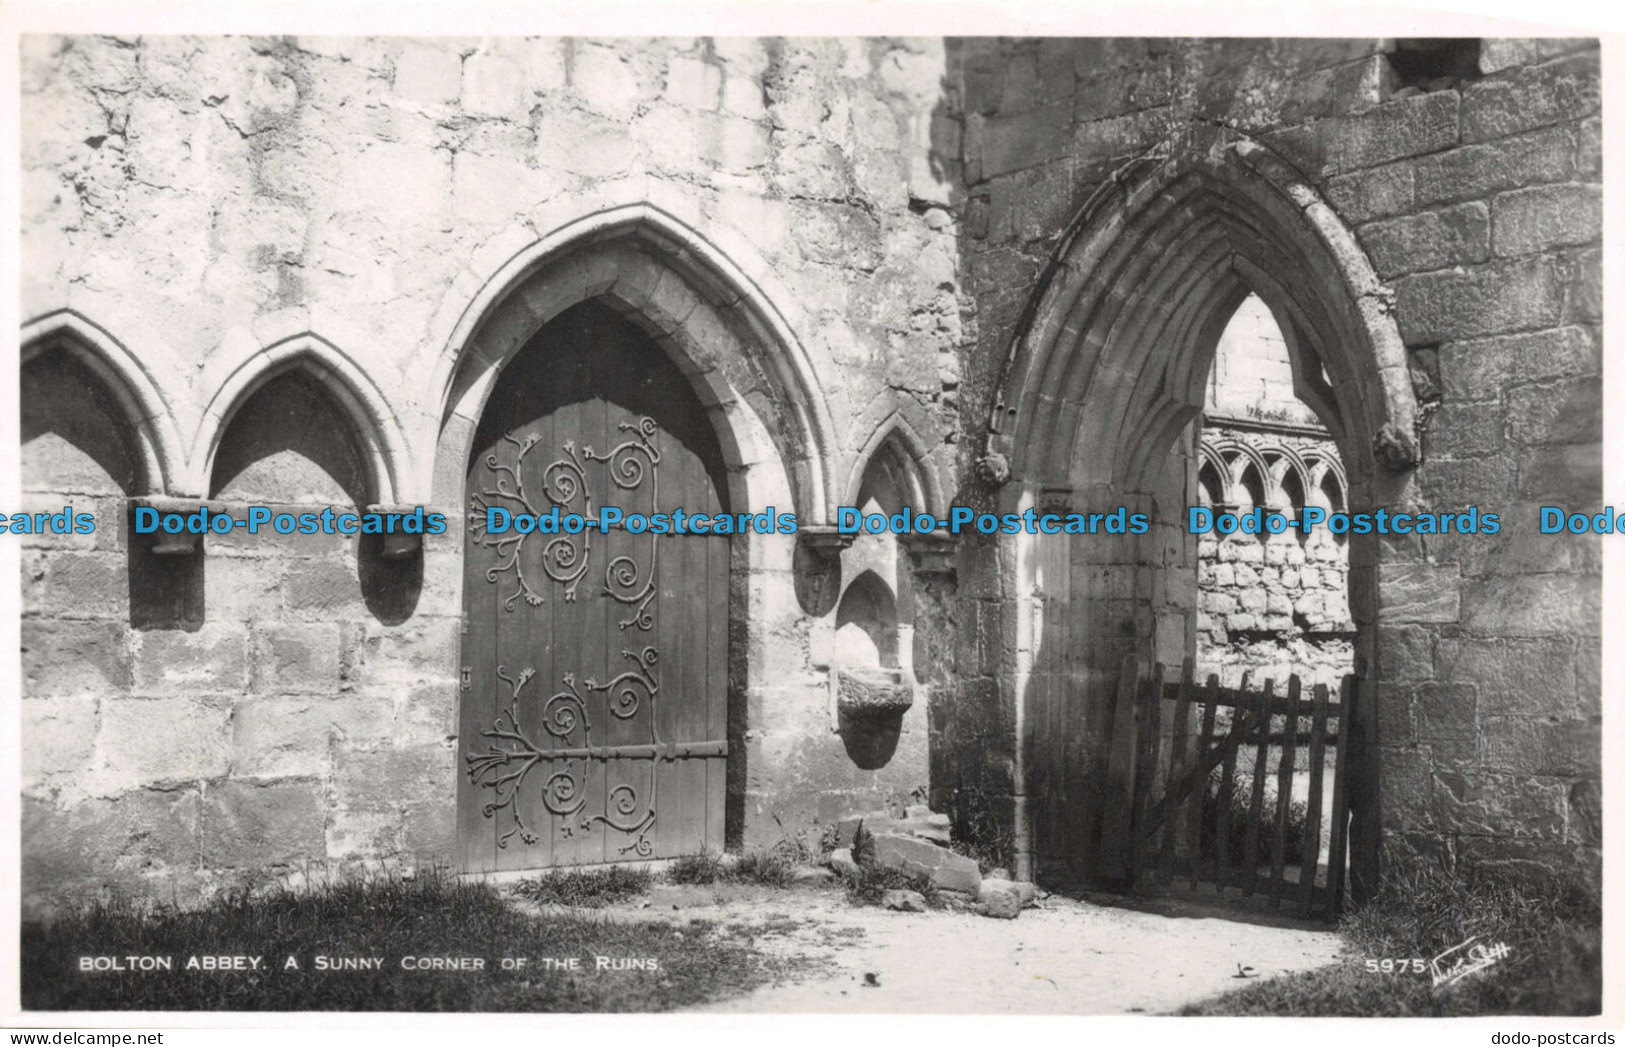 R105514 Bolton Abbey. A Sunny Corner Of The Ruins. Walter Scott. No 5975. RP - Welt